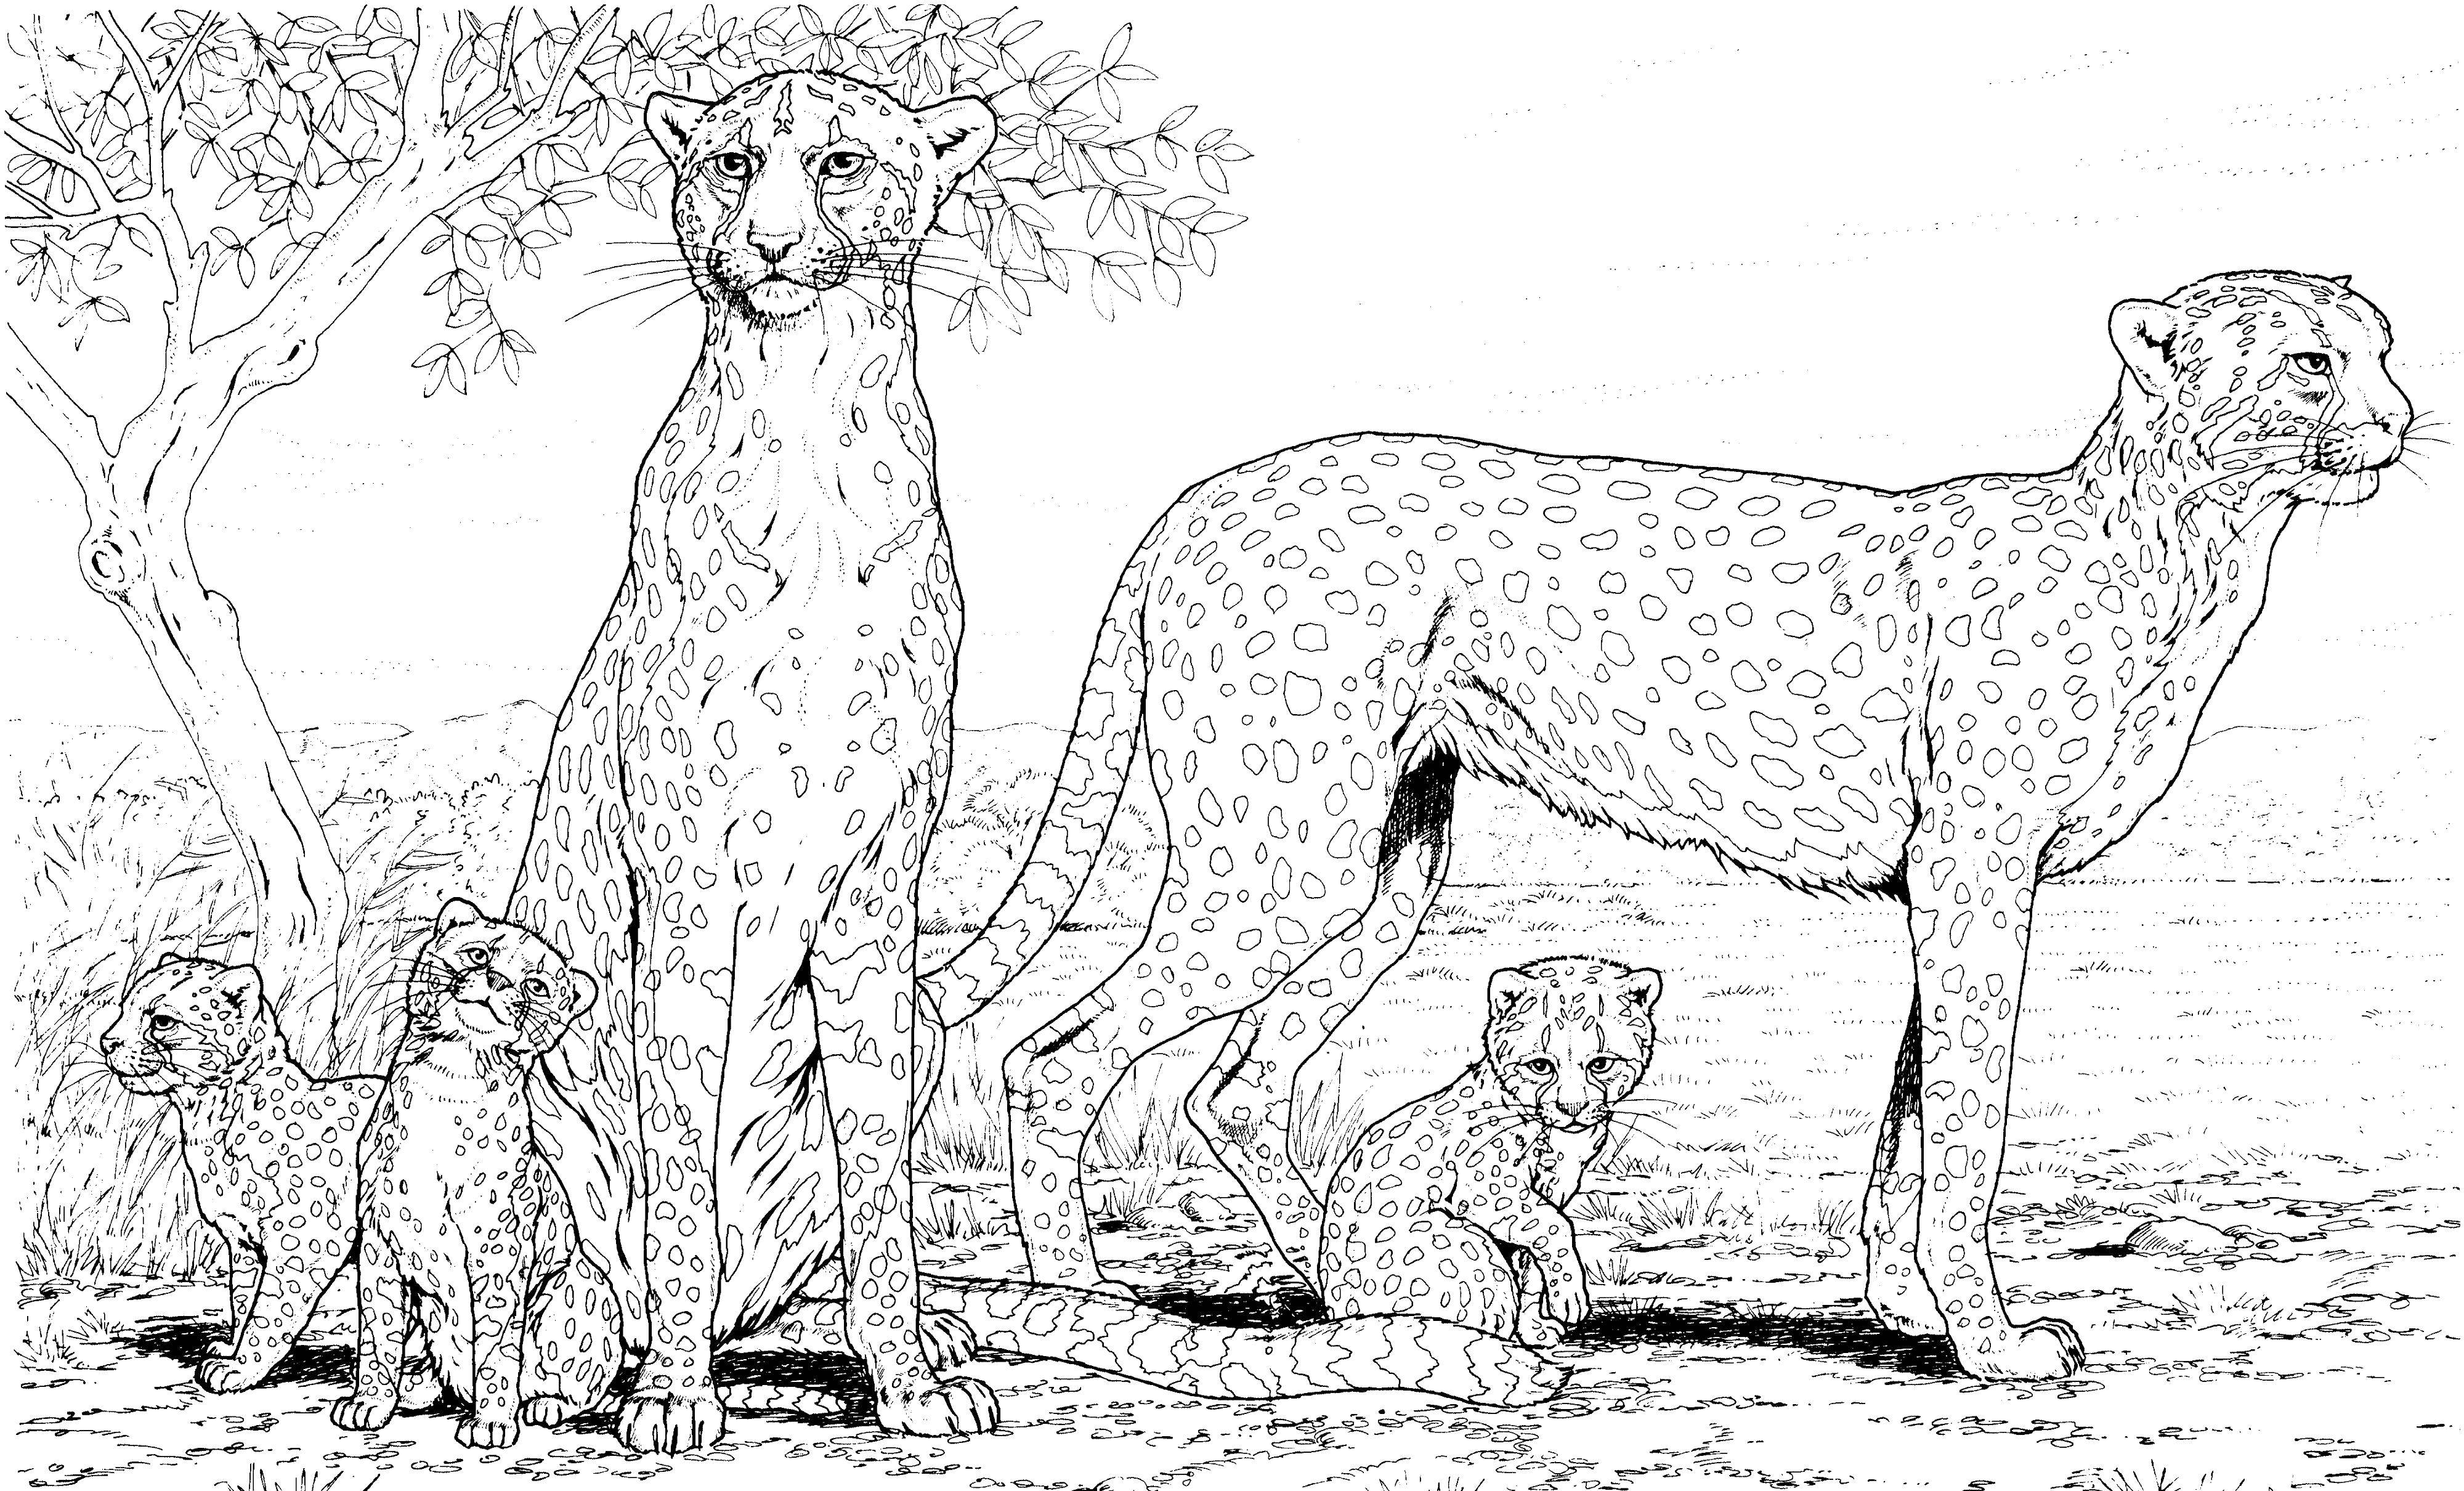 Coloring Family of leopards. Category Animals. Tags:  animals, leopards.